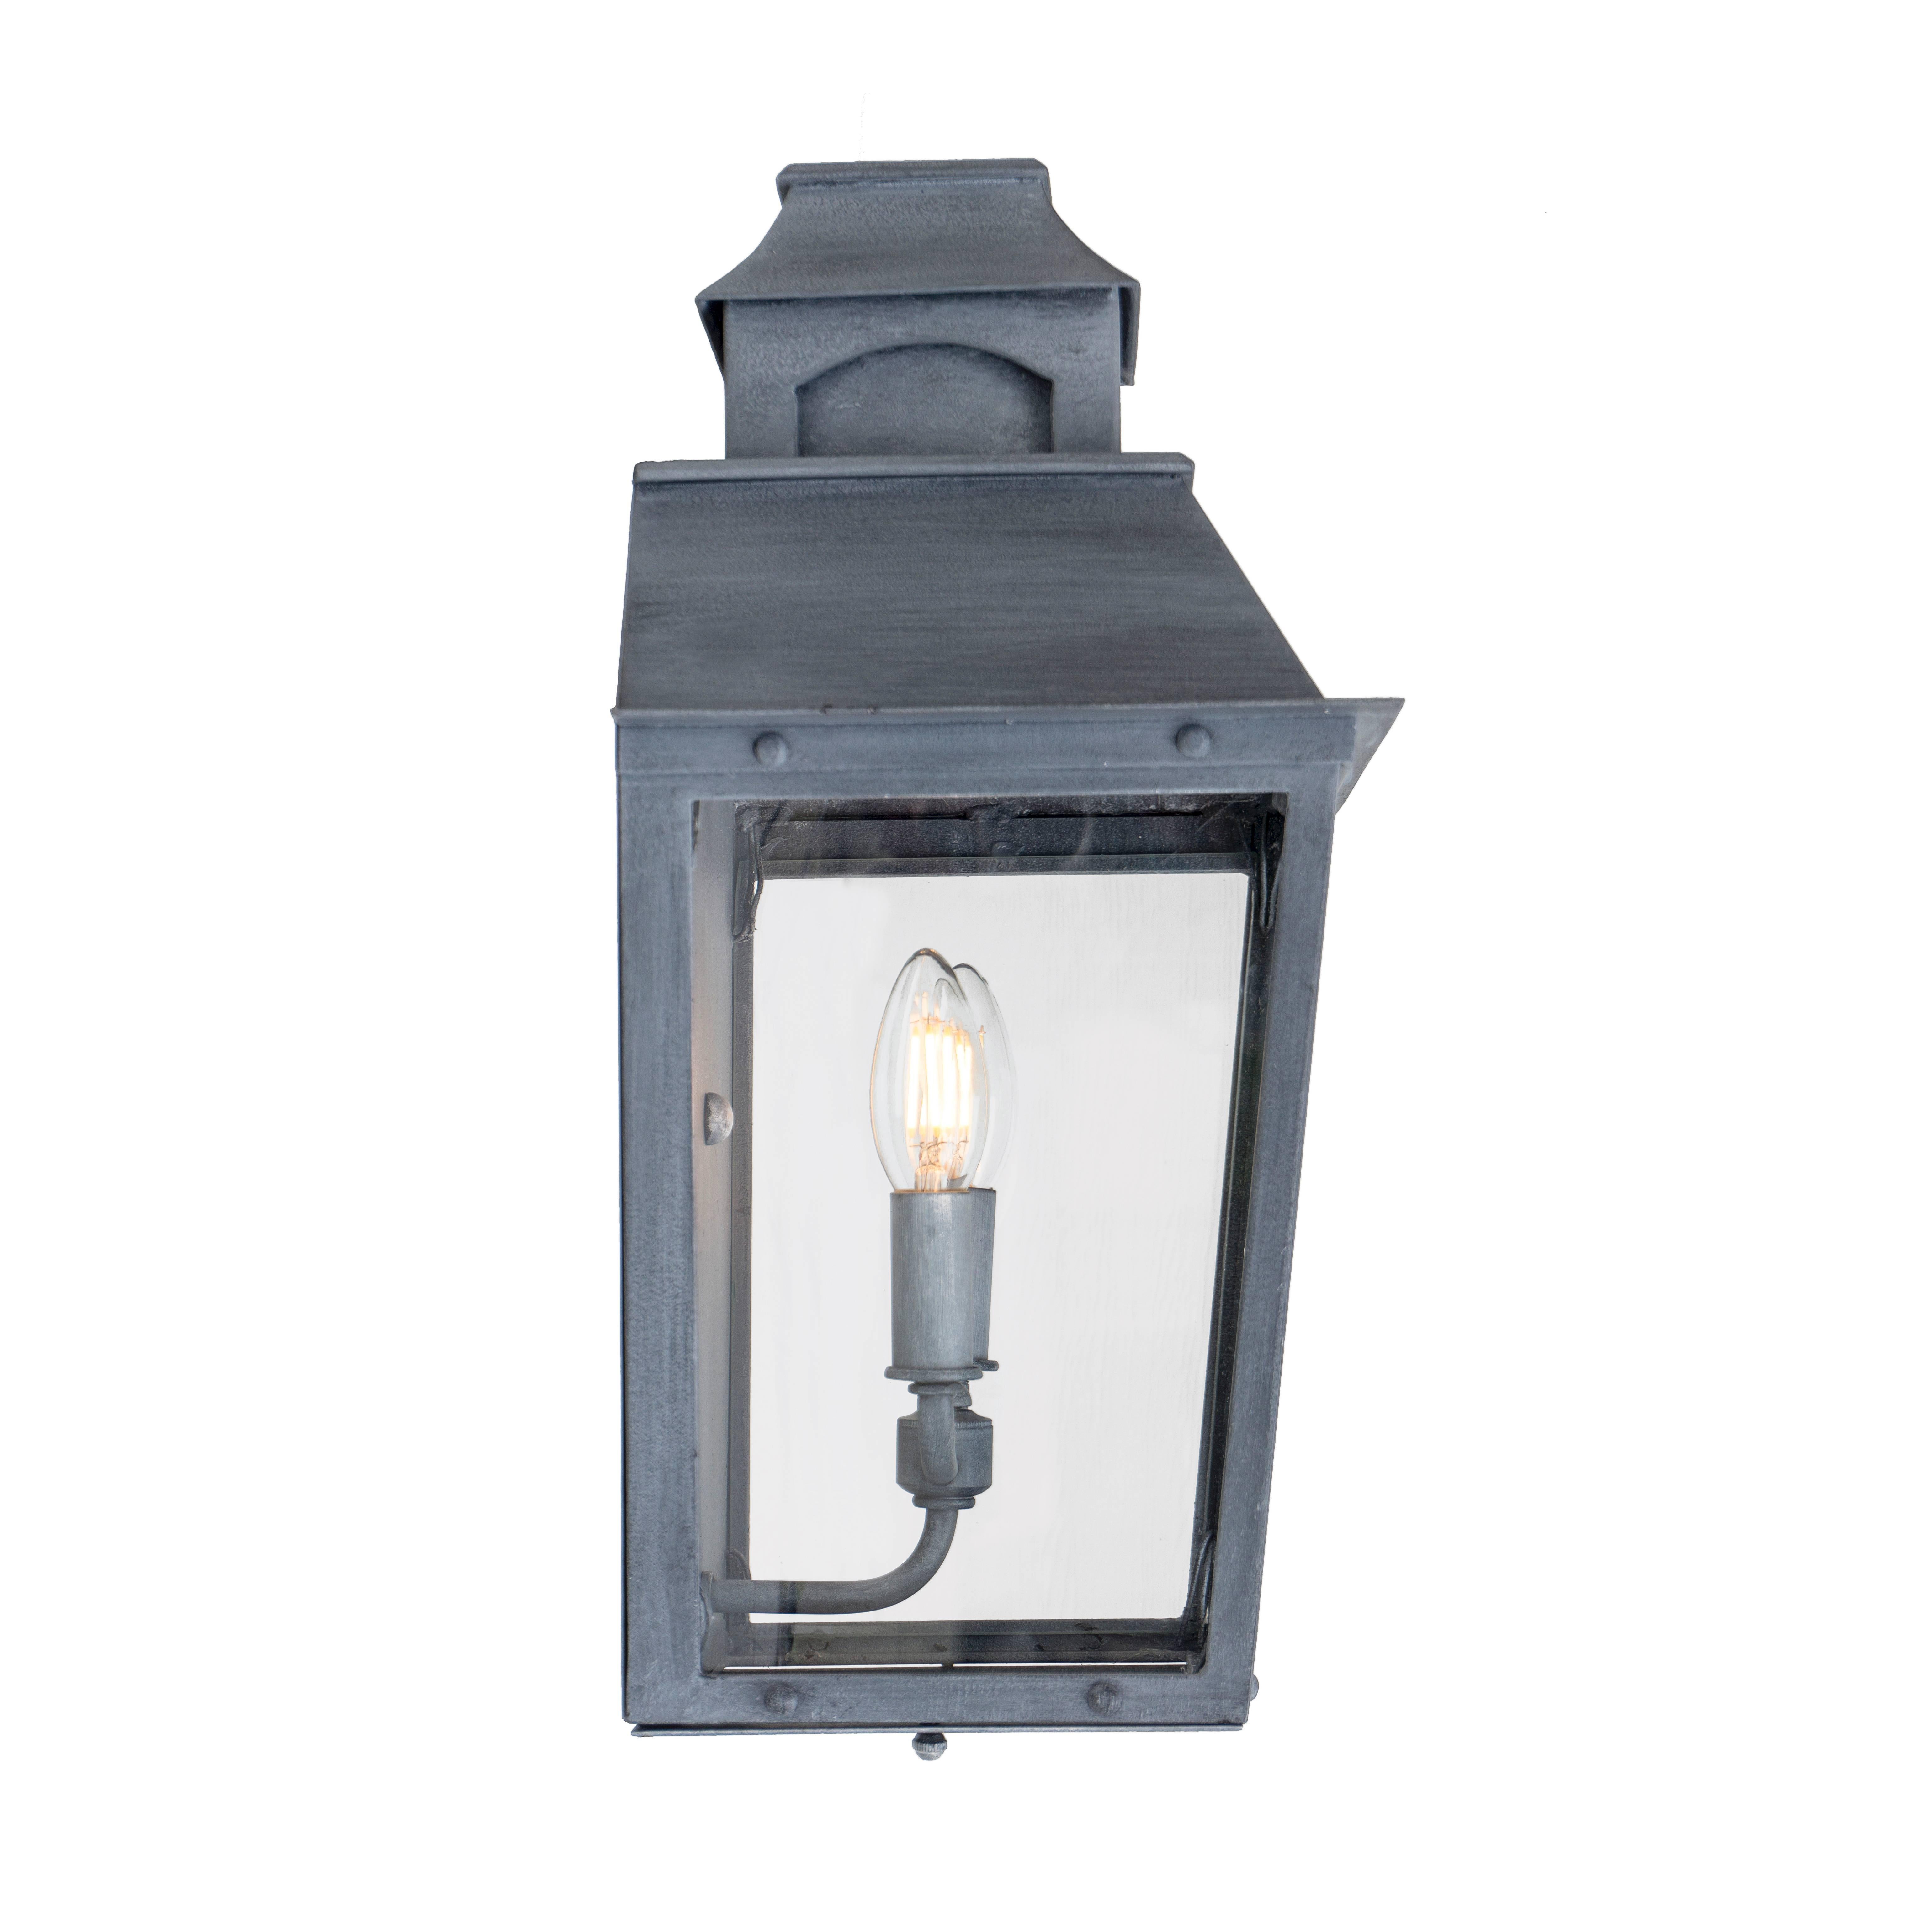 Colonial Custom Inspired Wrought Iron Wall Lantern with Premium Zinc Finish In New Condition For Sale In Santa Paula, CA